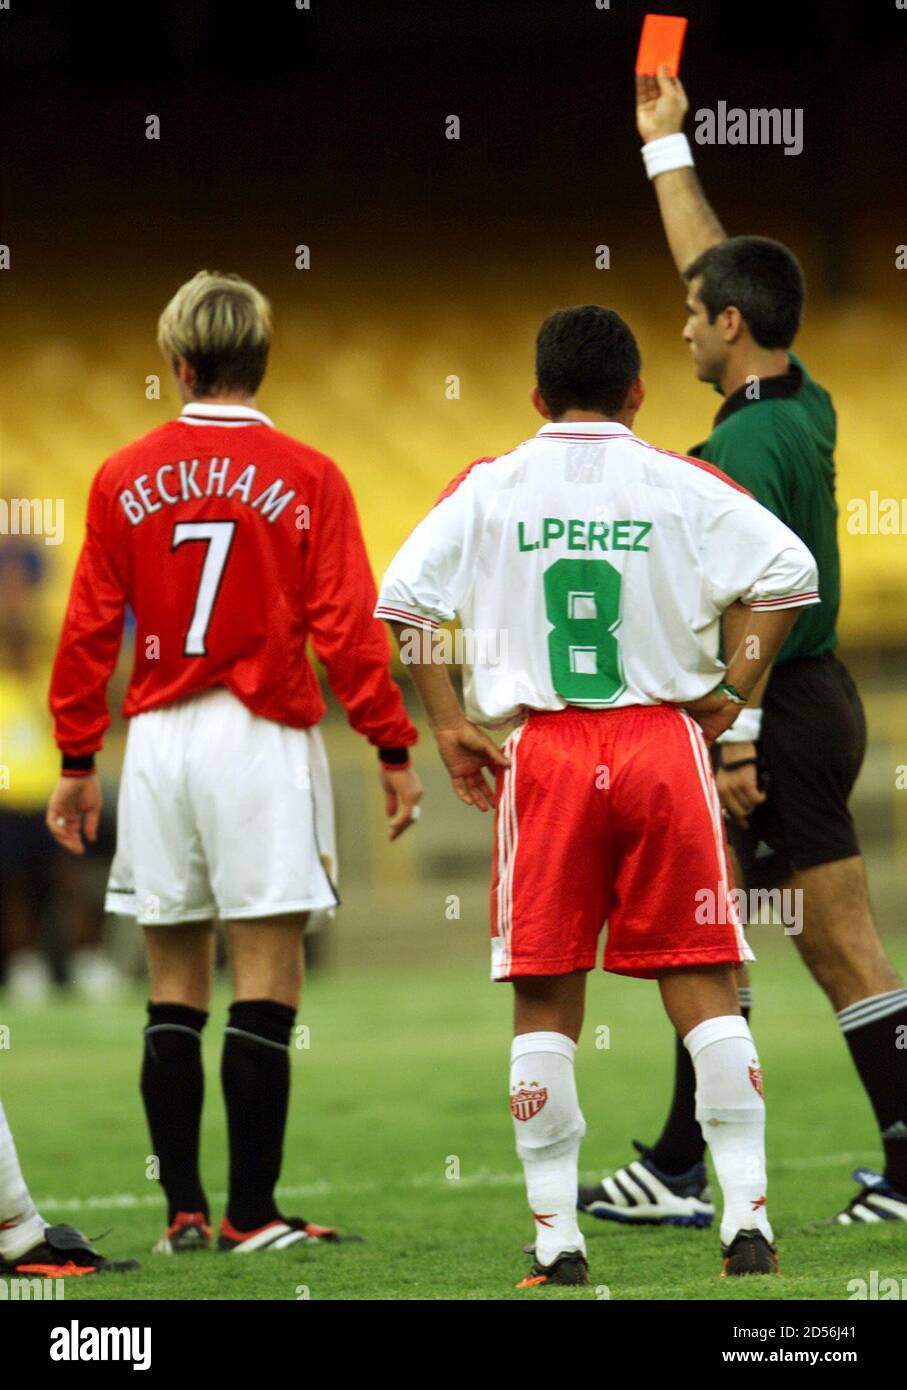 Midfielder David Beckham of Manchester United (L) receives a card and is sent off by referee Horacio of Argentina for a high challenge against Jose Milian of Necaxa, during the